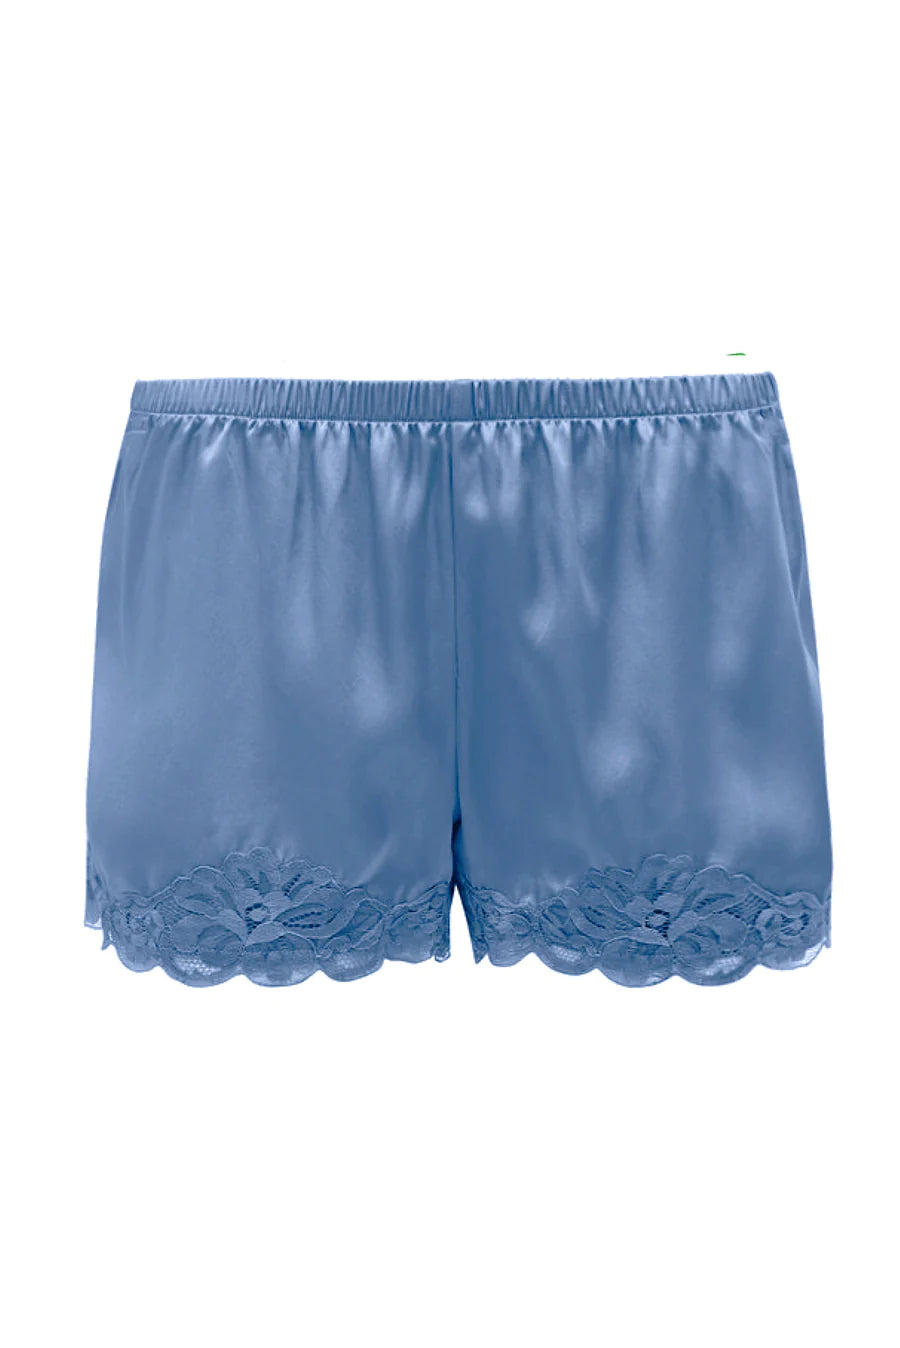 Floral Lace Shorts in Mediterranean Blue